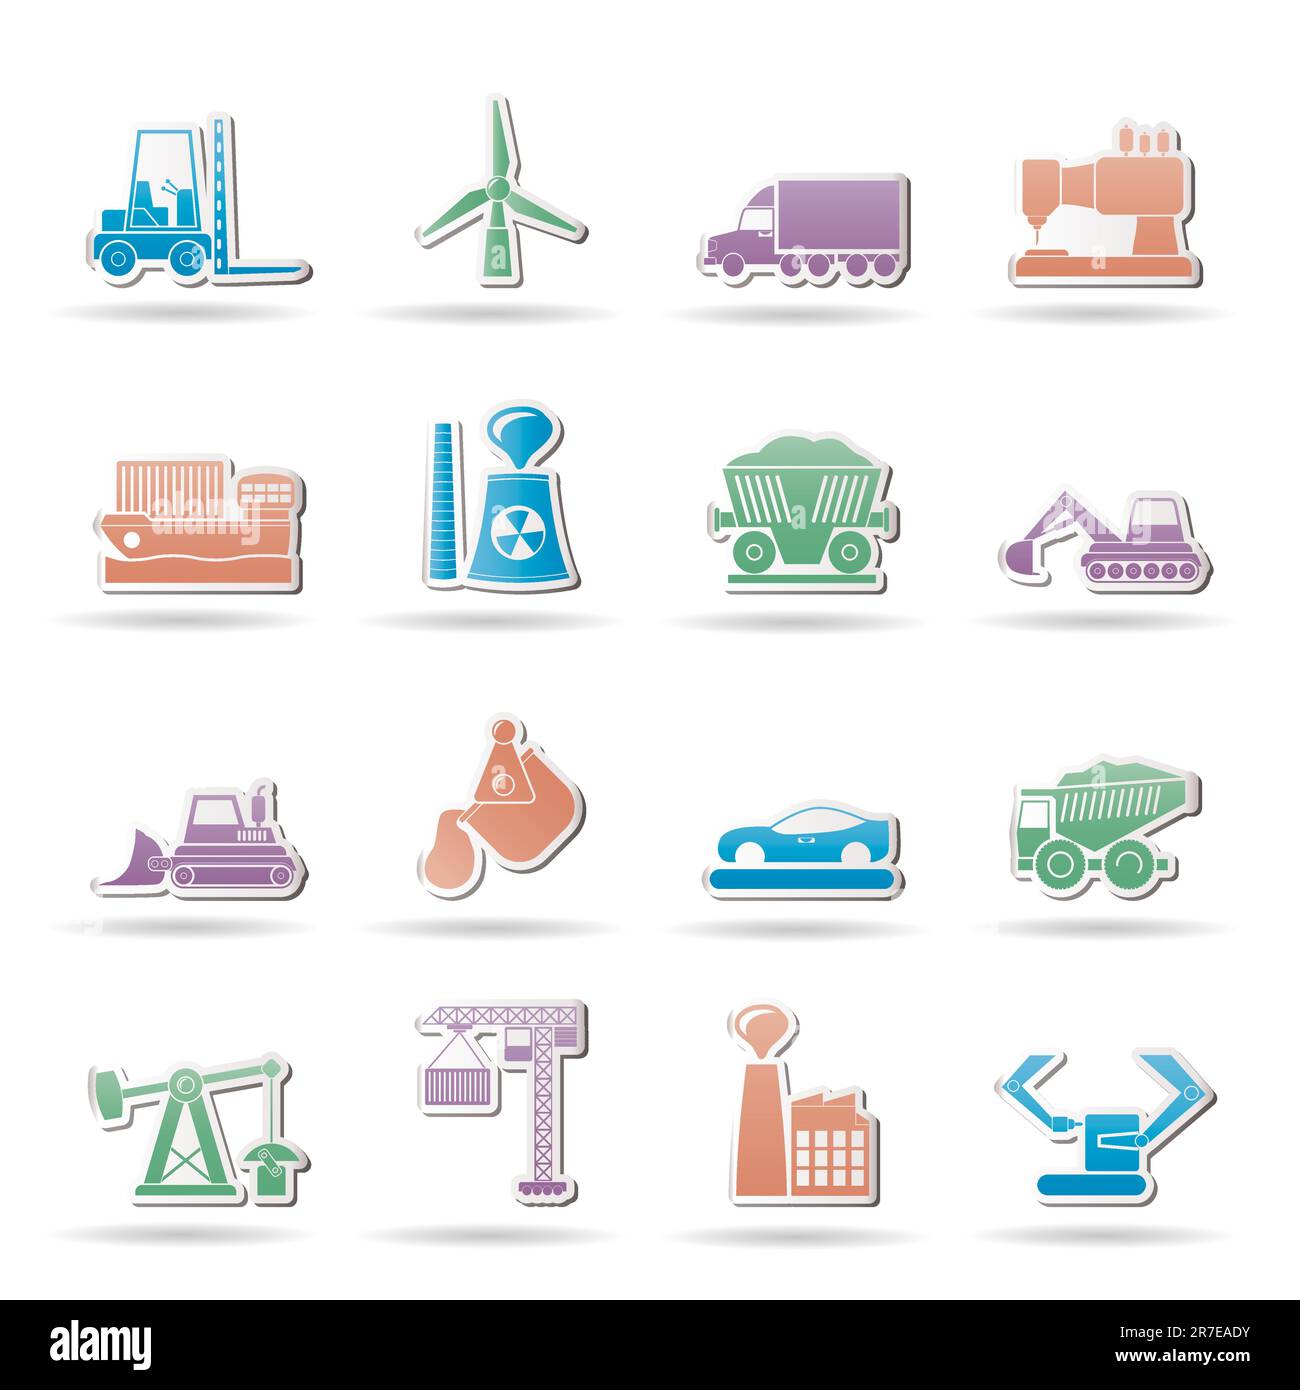 Business and industry icons - vector icon set Stock Vector